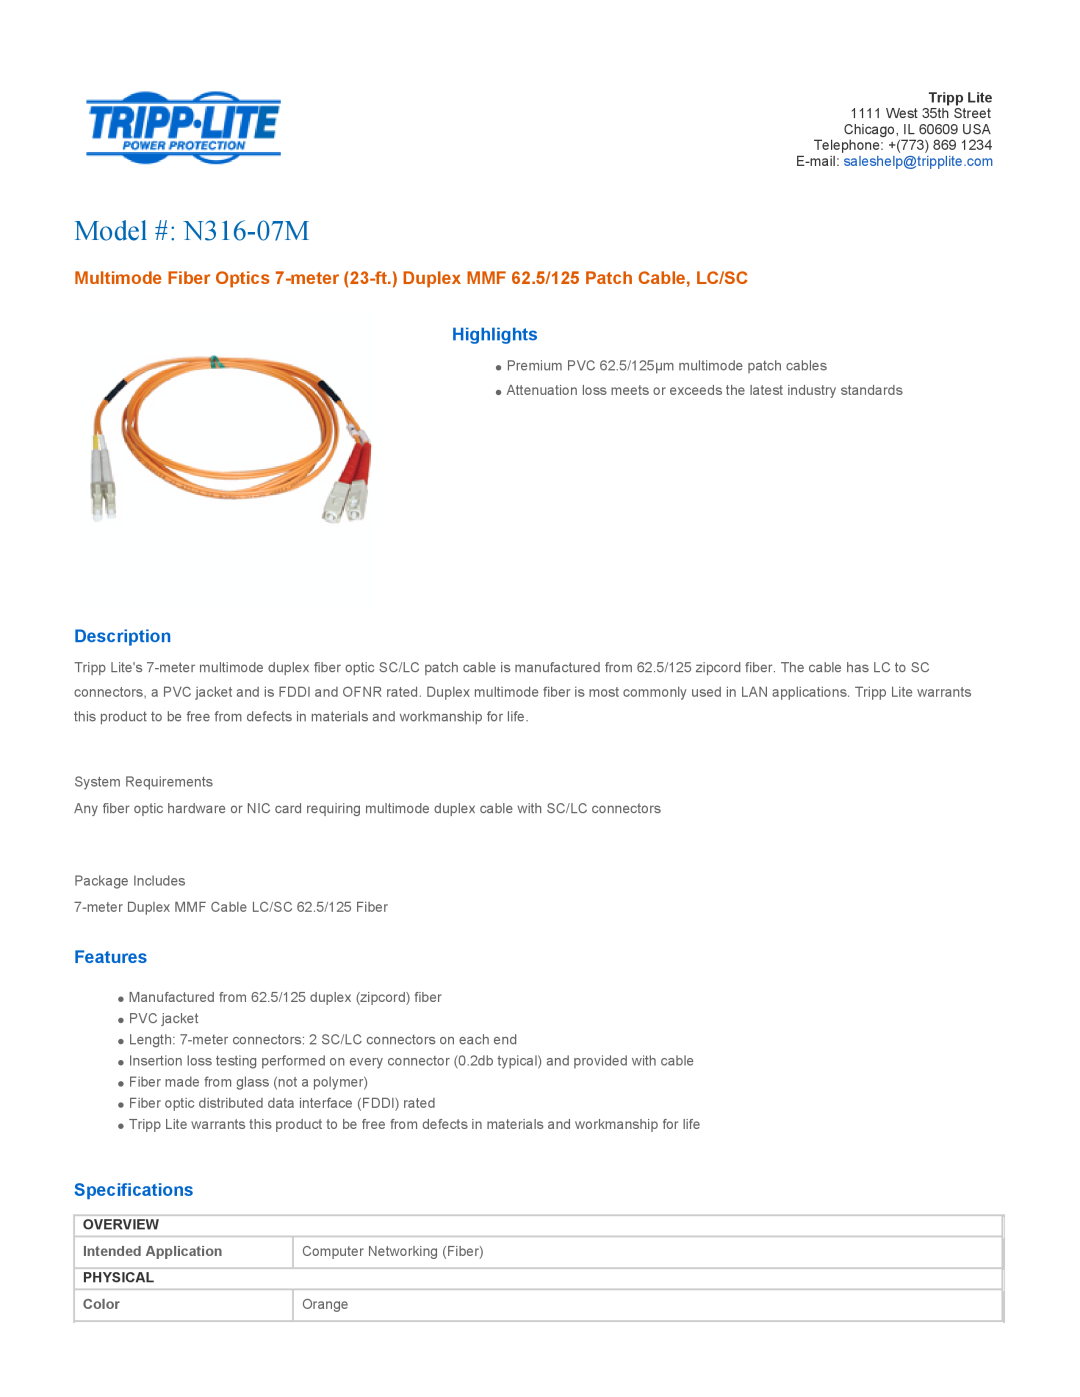 Tripp Lite N316-07M specifications Overview, Intended Application, Computer Networking Fiber, Physical, Color, Orange 